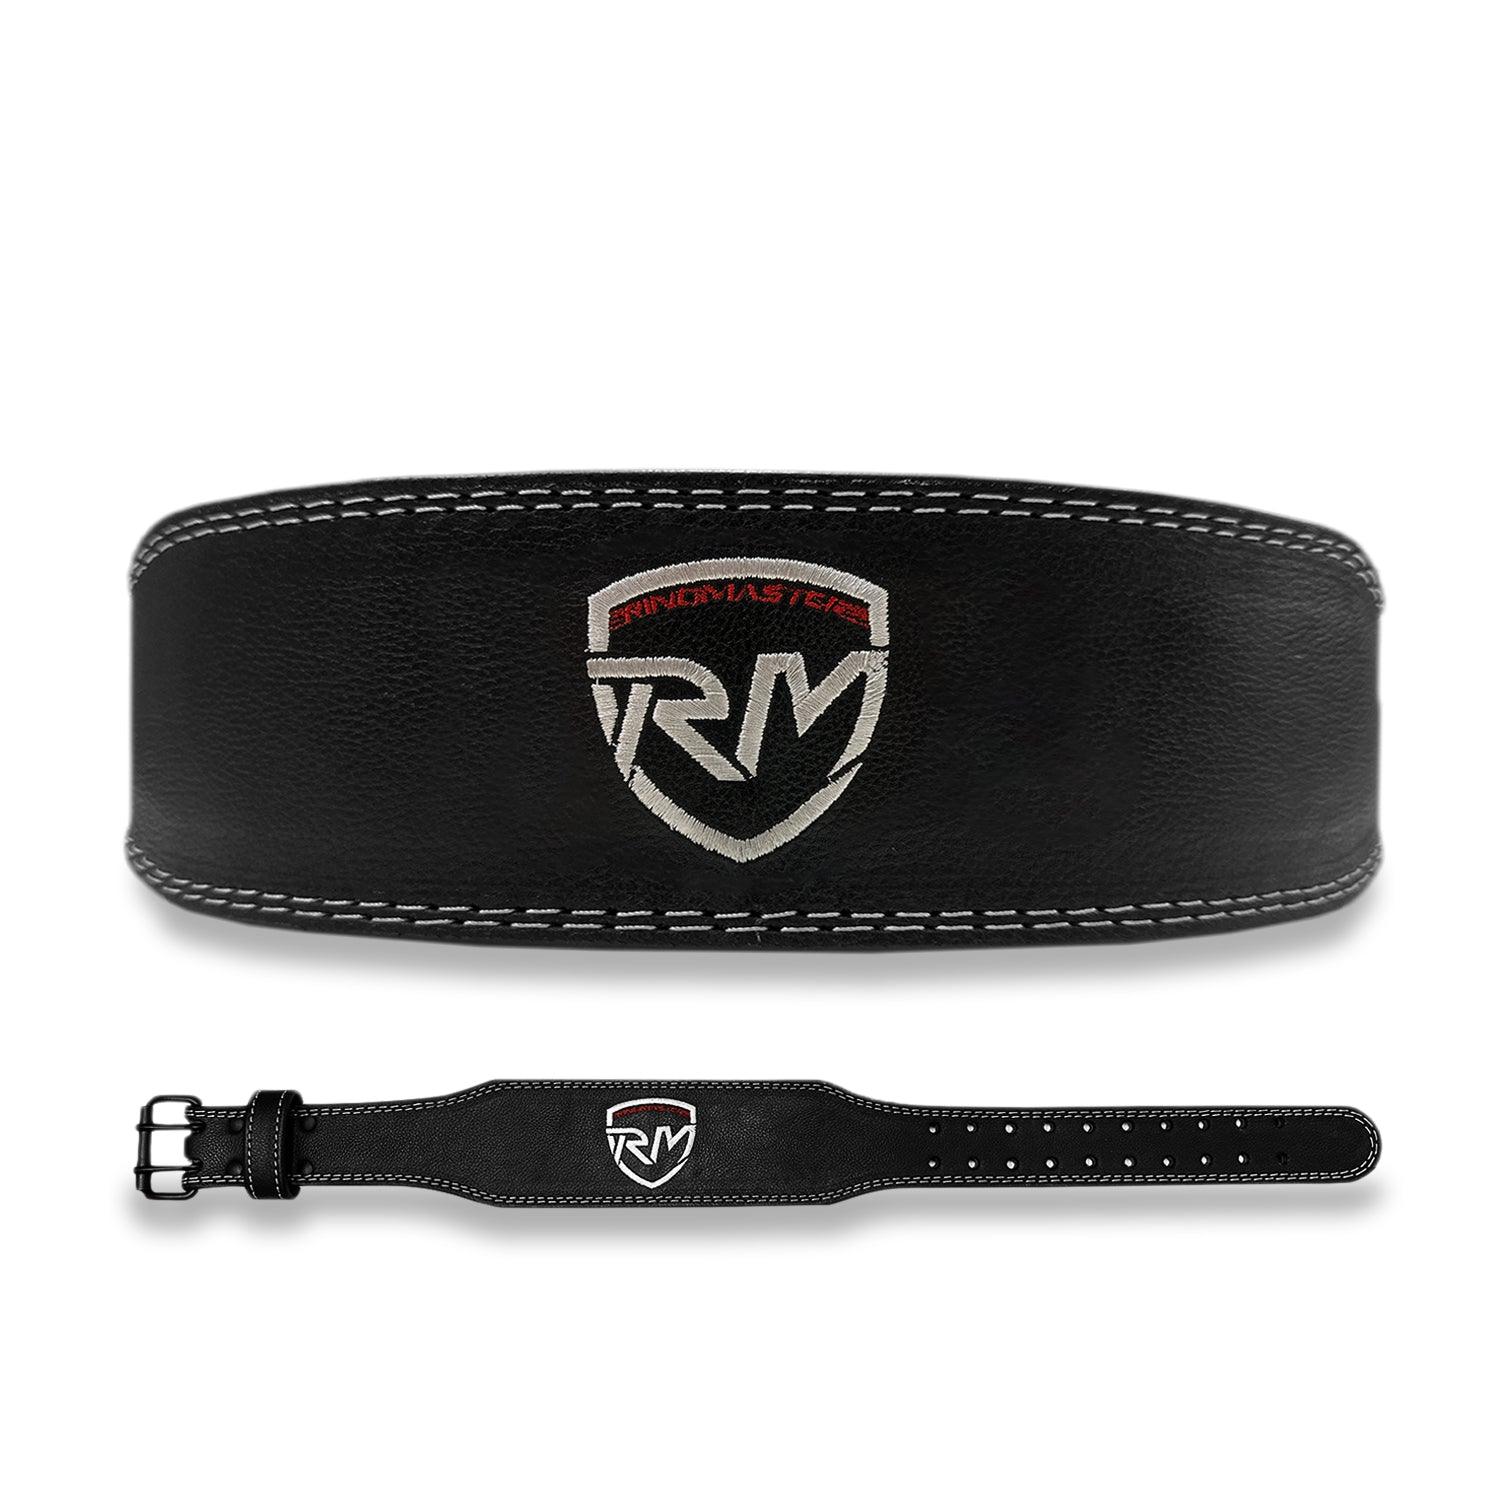 RingMaster Sports Genuine Leather Female Weightlifting Gym Belt - RINGMASTER SPORTS - Made For Champions